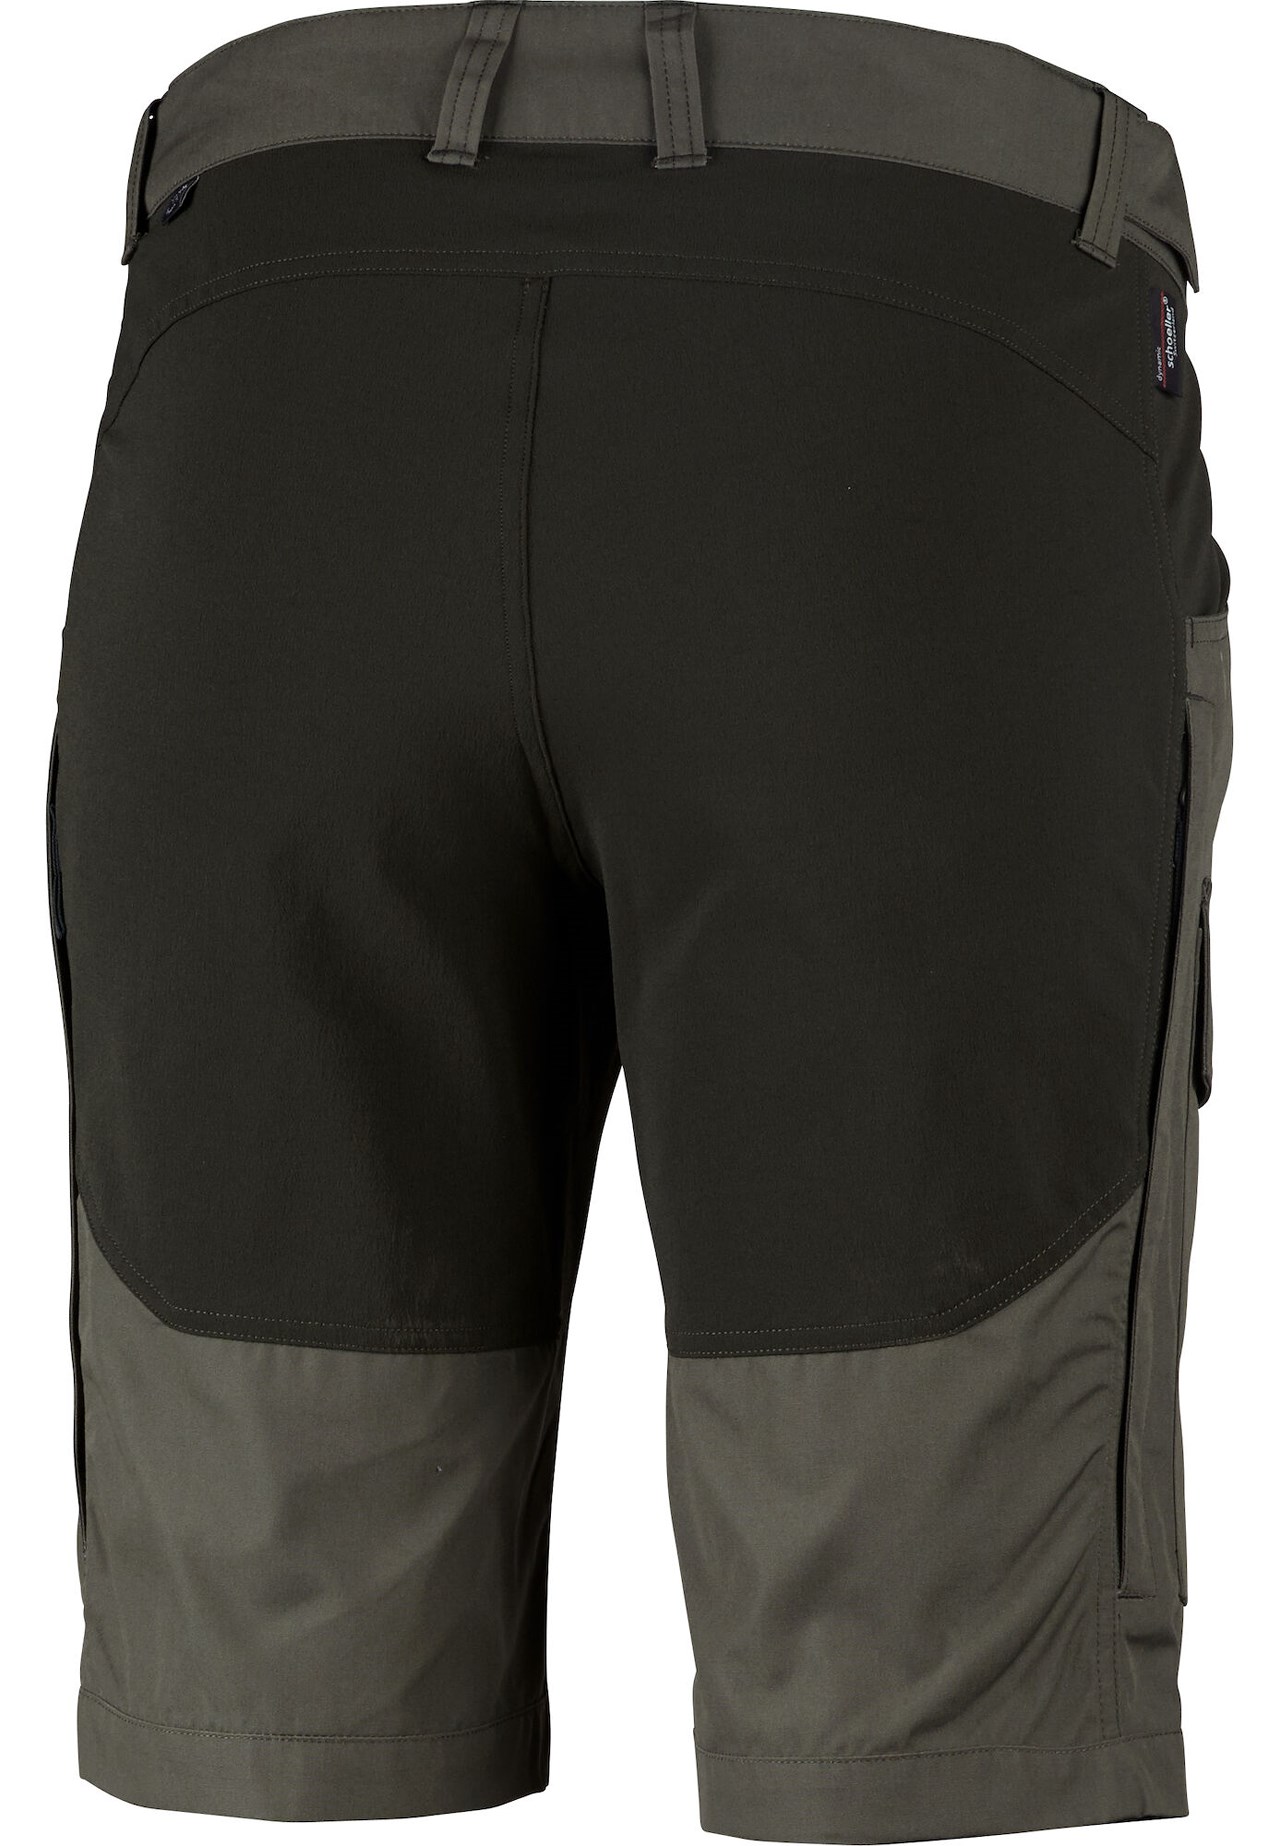 Lundhags "Authentic II Ms Shorts"